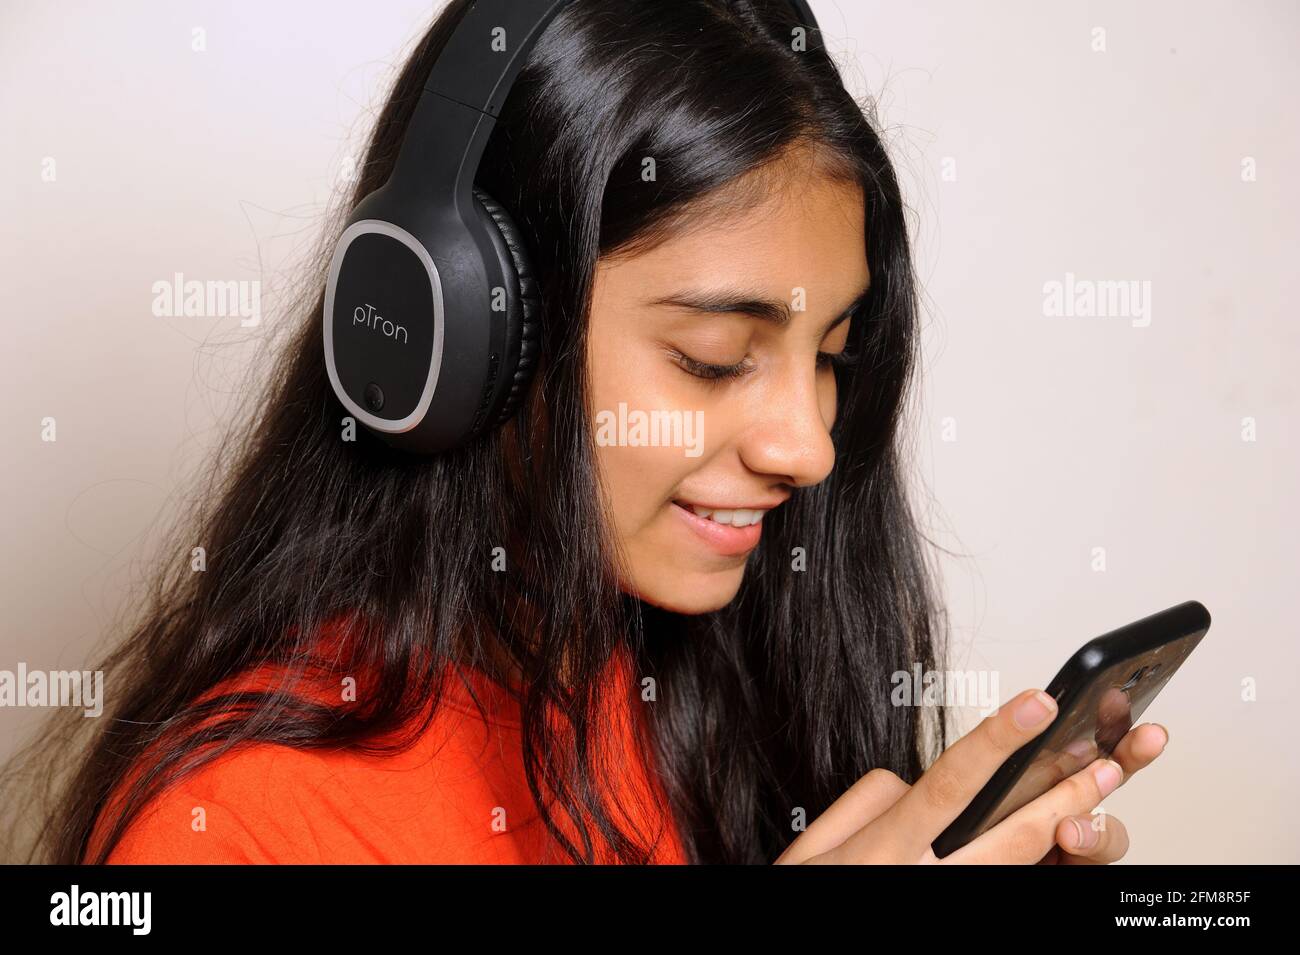 Girl in the headphones lovely indian girl teenager 14 years old ...